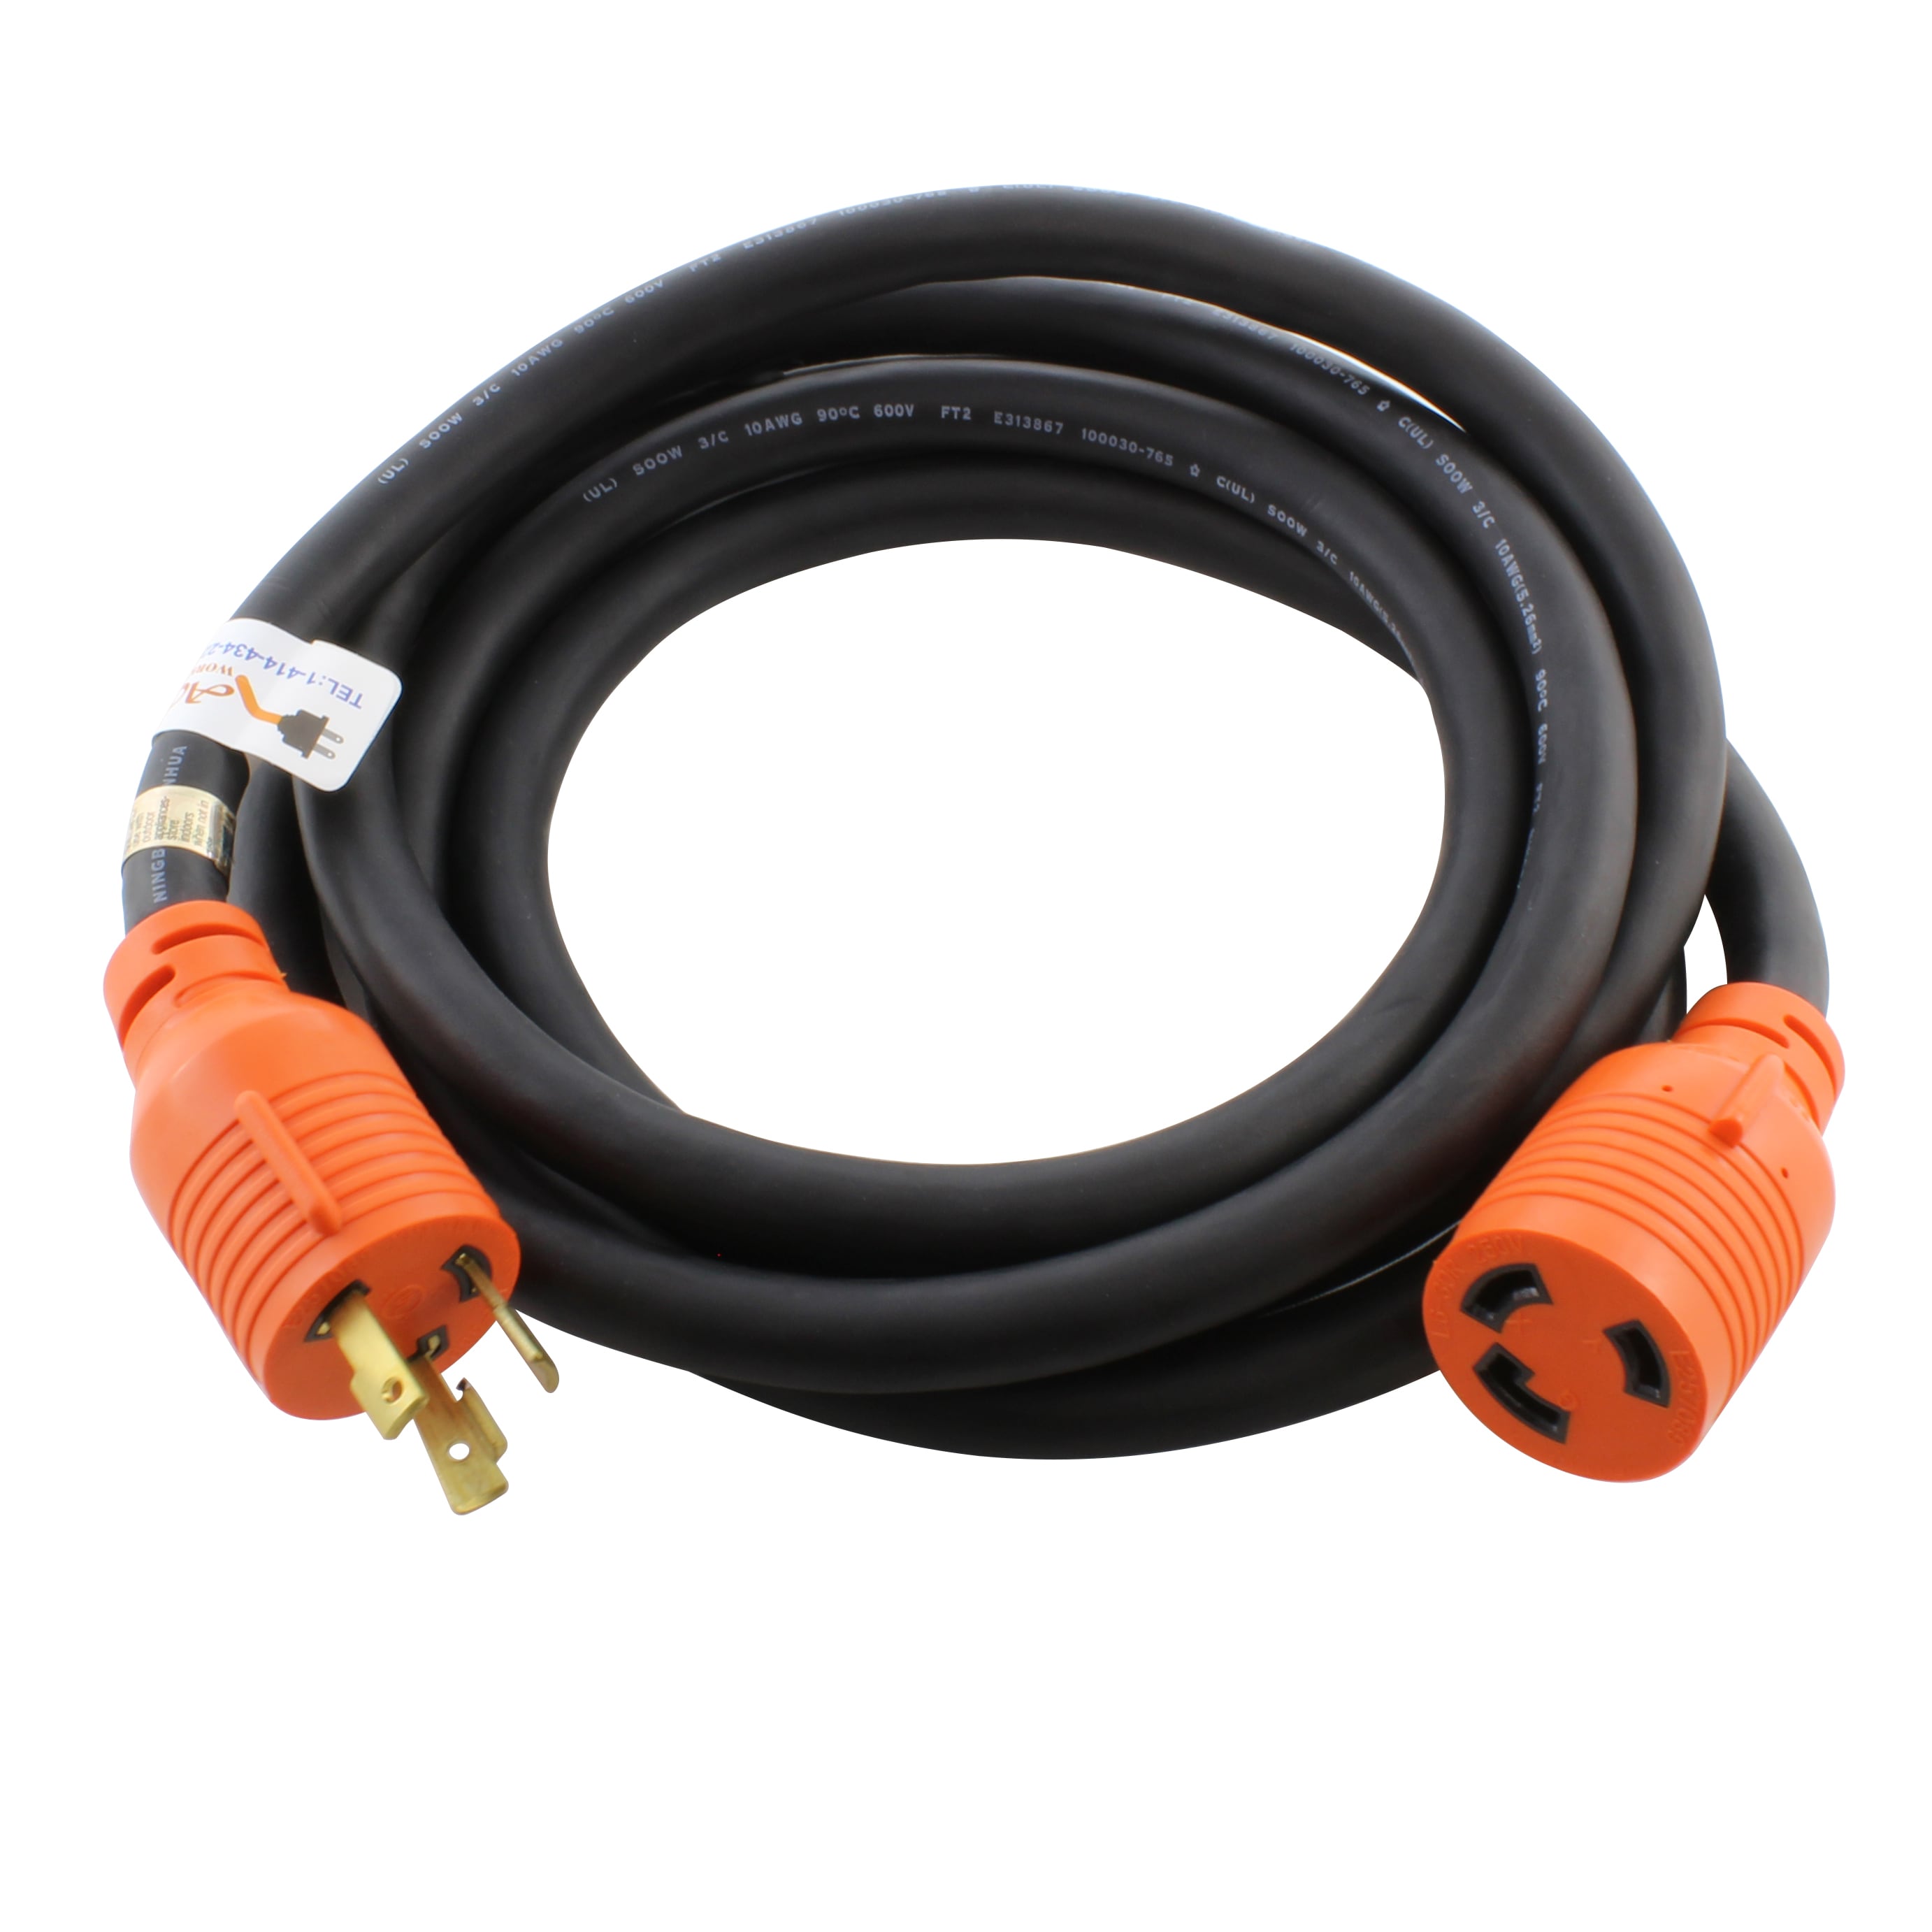 Extension Cord Safety: A Comprehensive Guide - Roman Electric